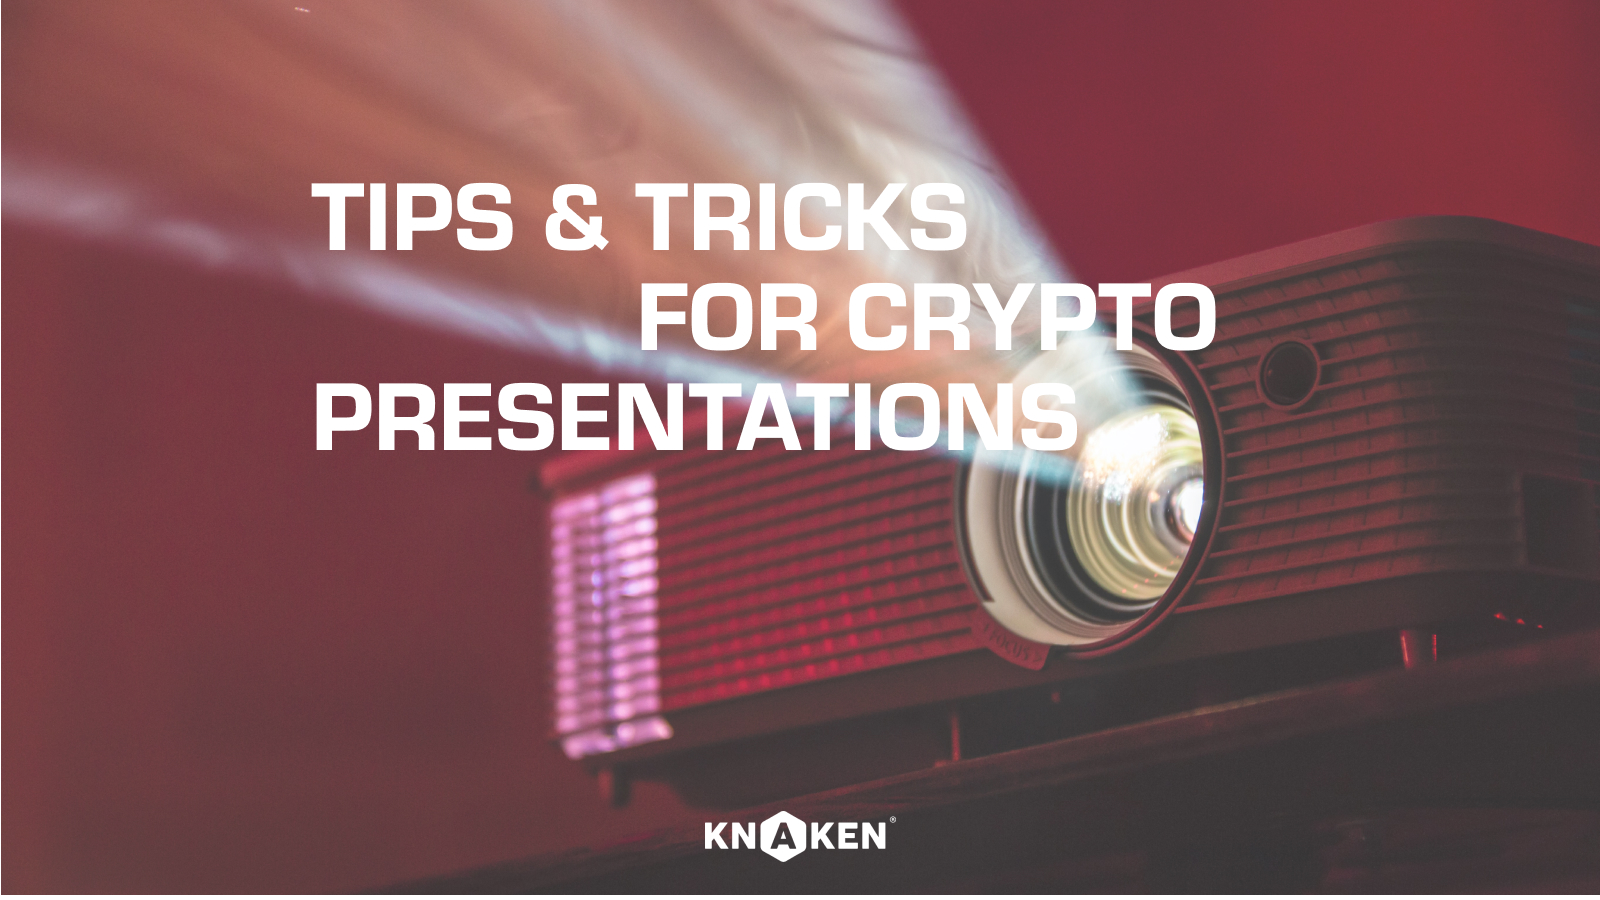 All tips for when you need to give a presentation about crypto